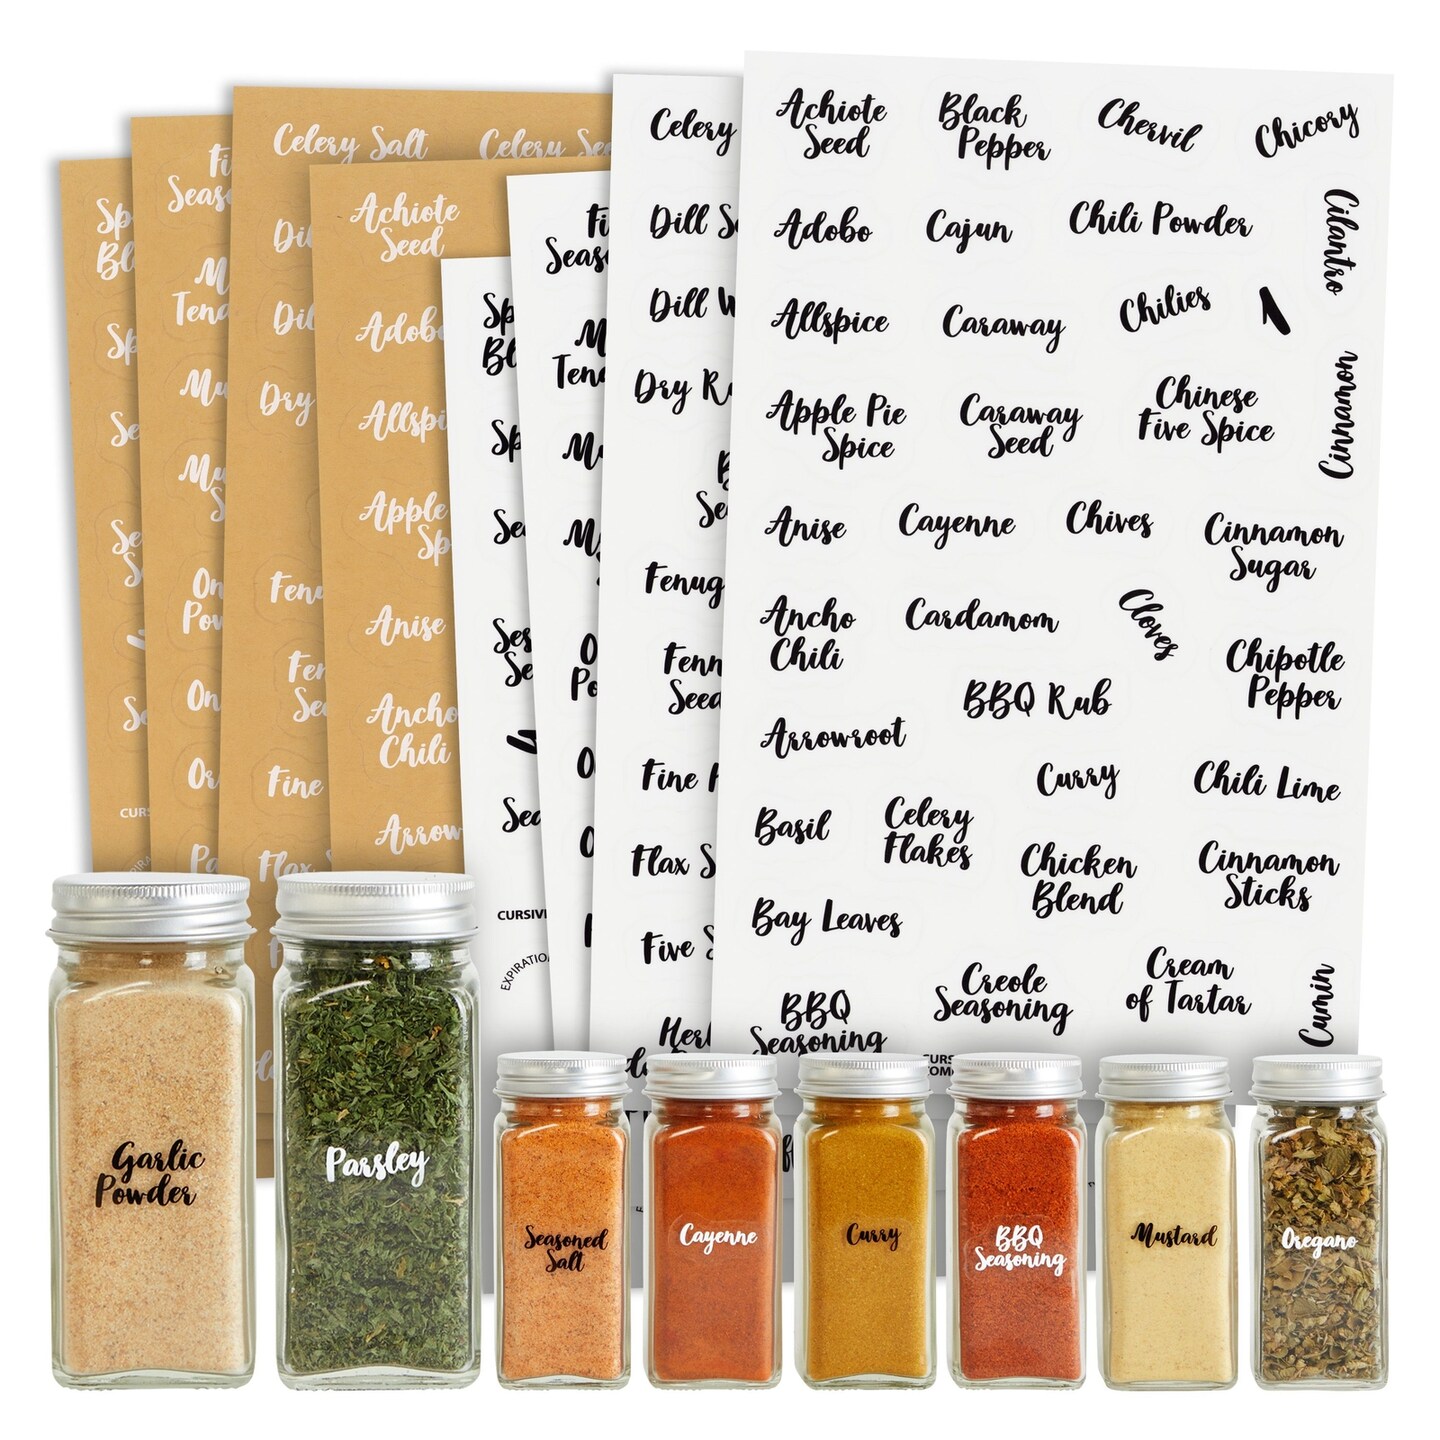 Talented Kitchen 300 Preprinted Spice Labels, Clear Spice Jar